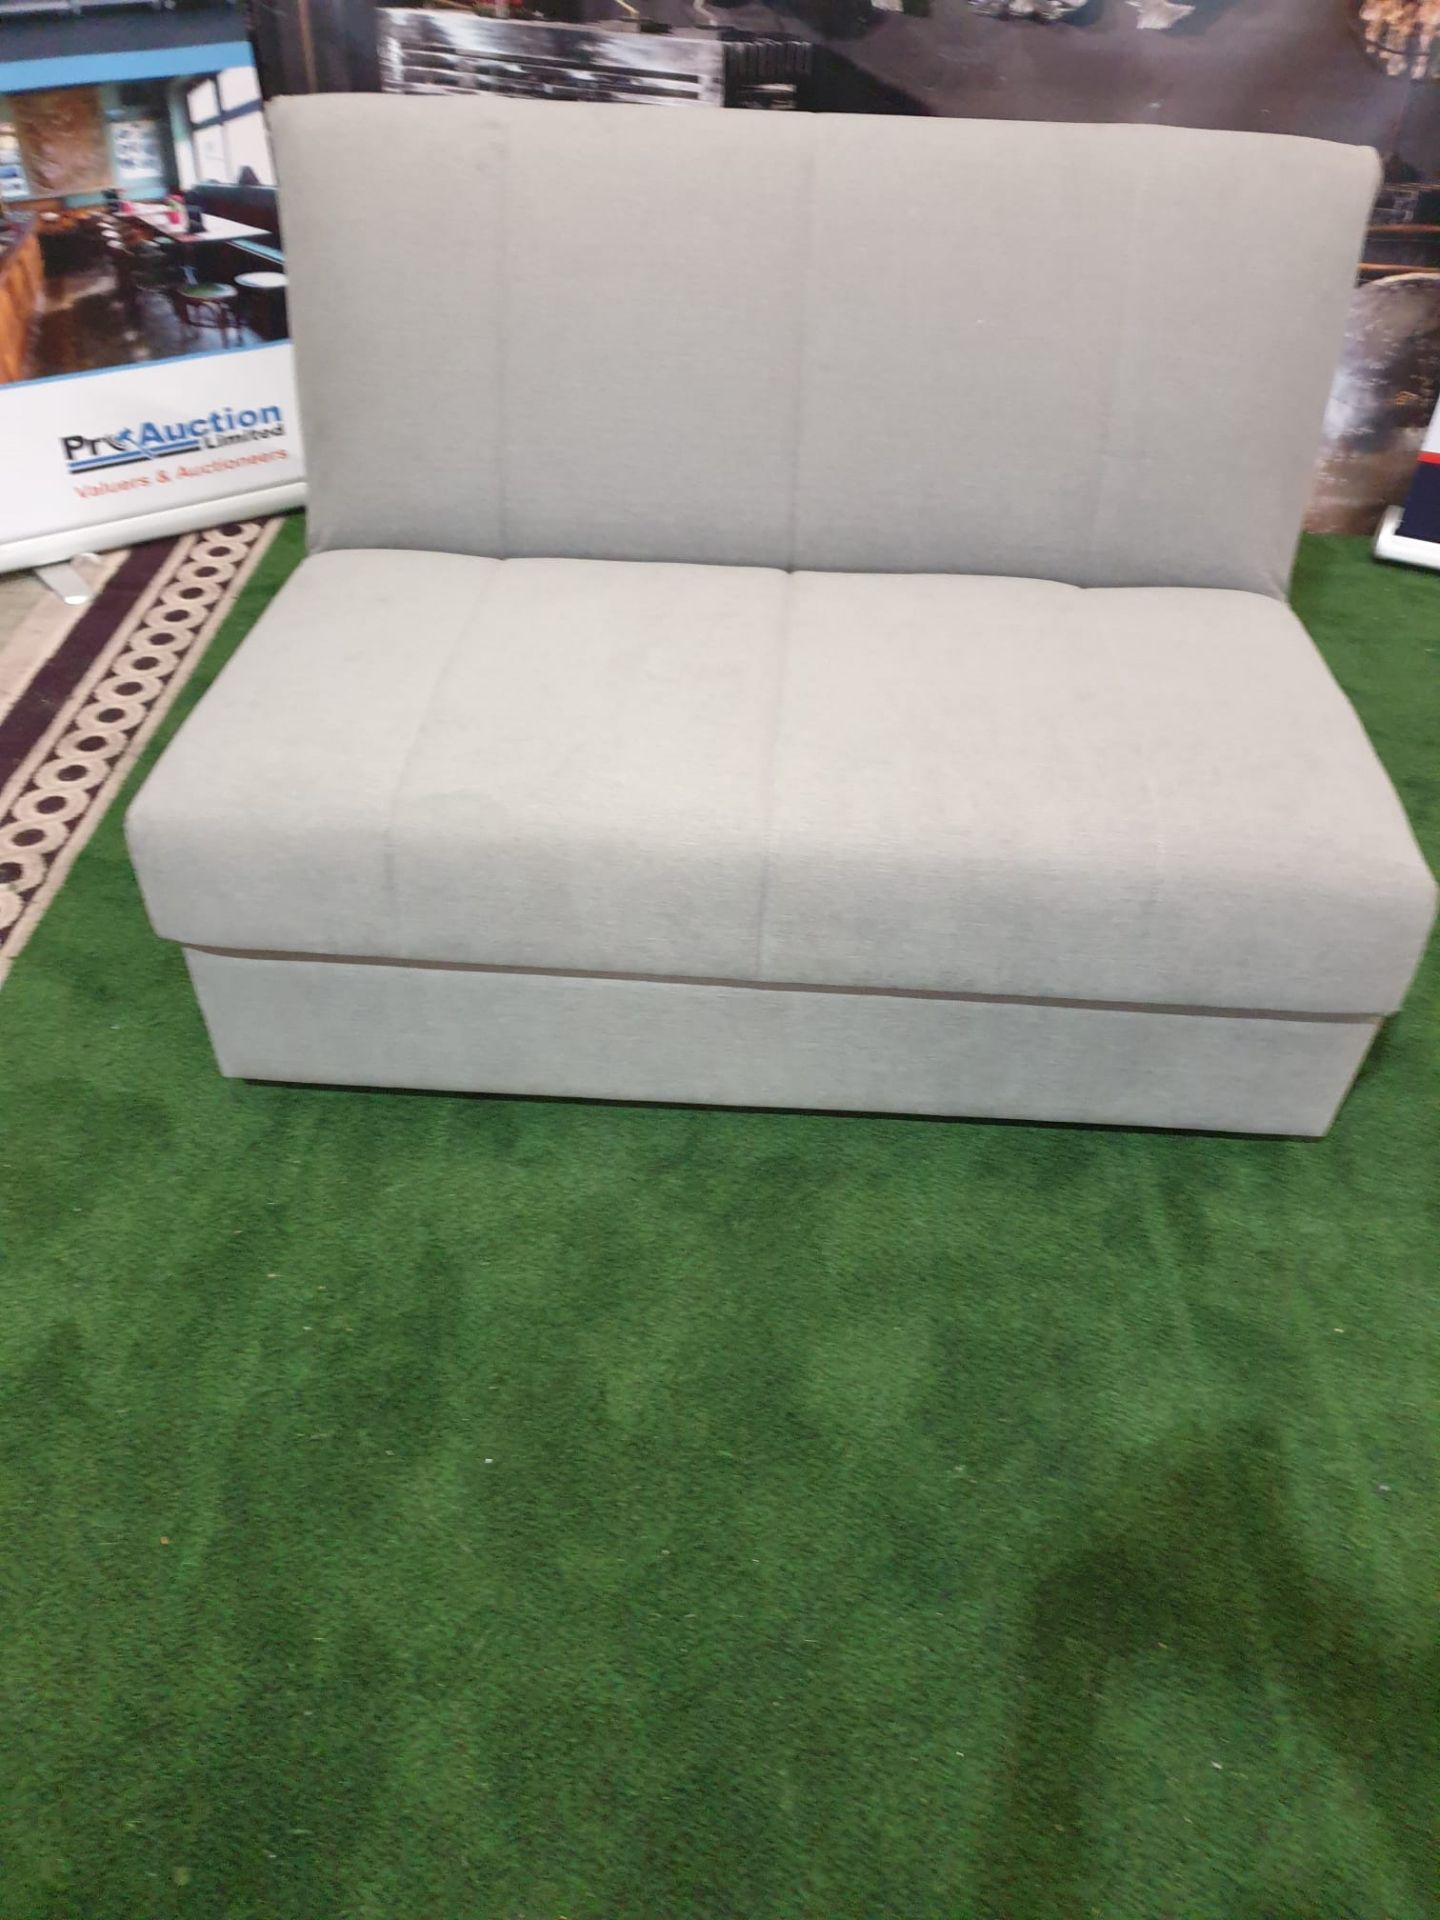 Sofa Bed Dreamworks Metz Berwick Stone Upholstered Double Sofabed UK made part of the - Image 2 of 2